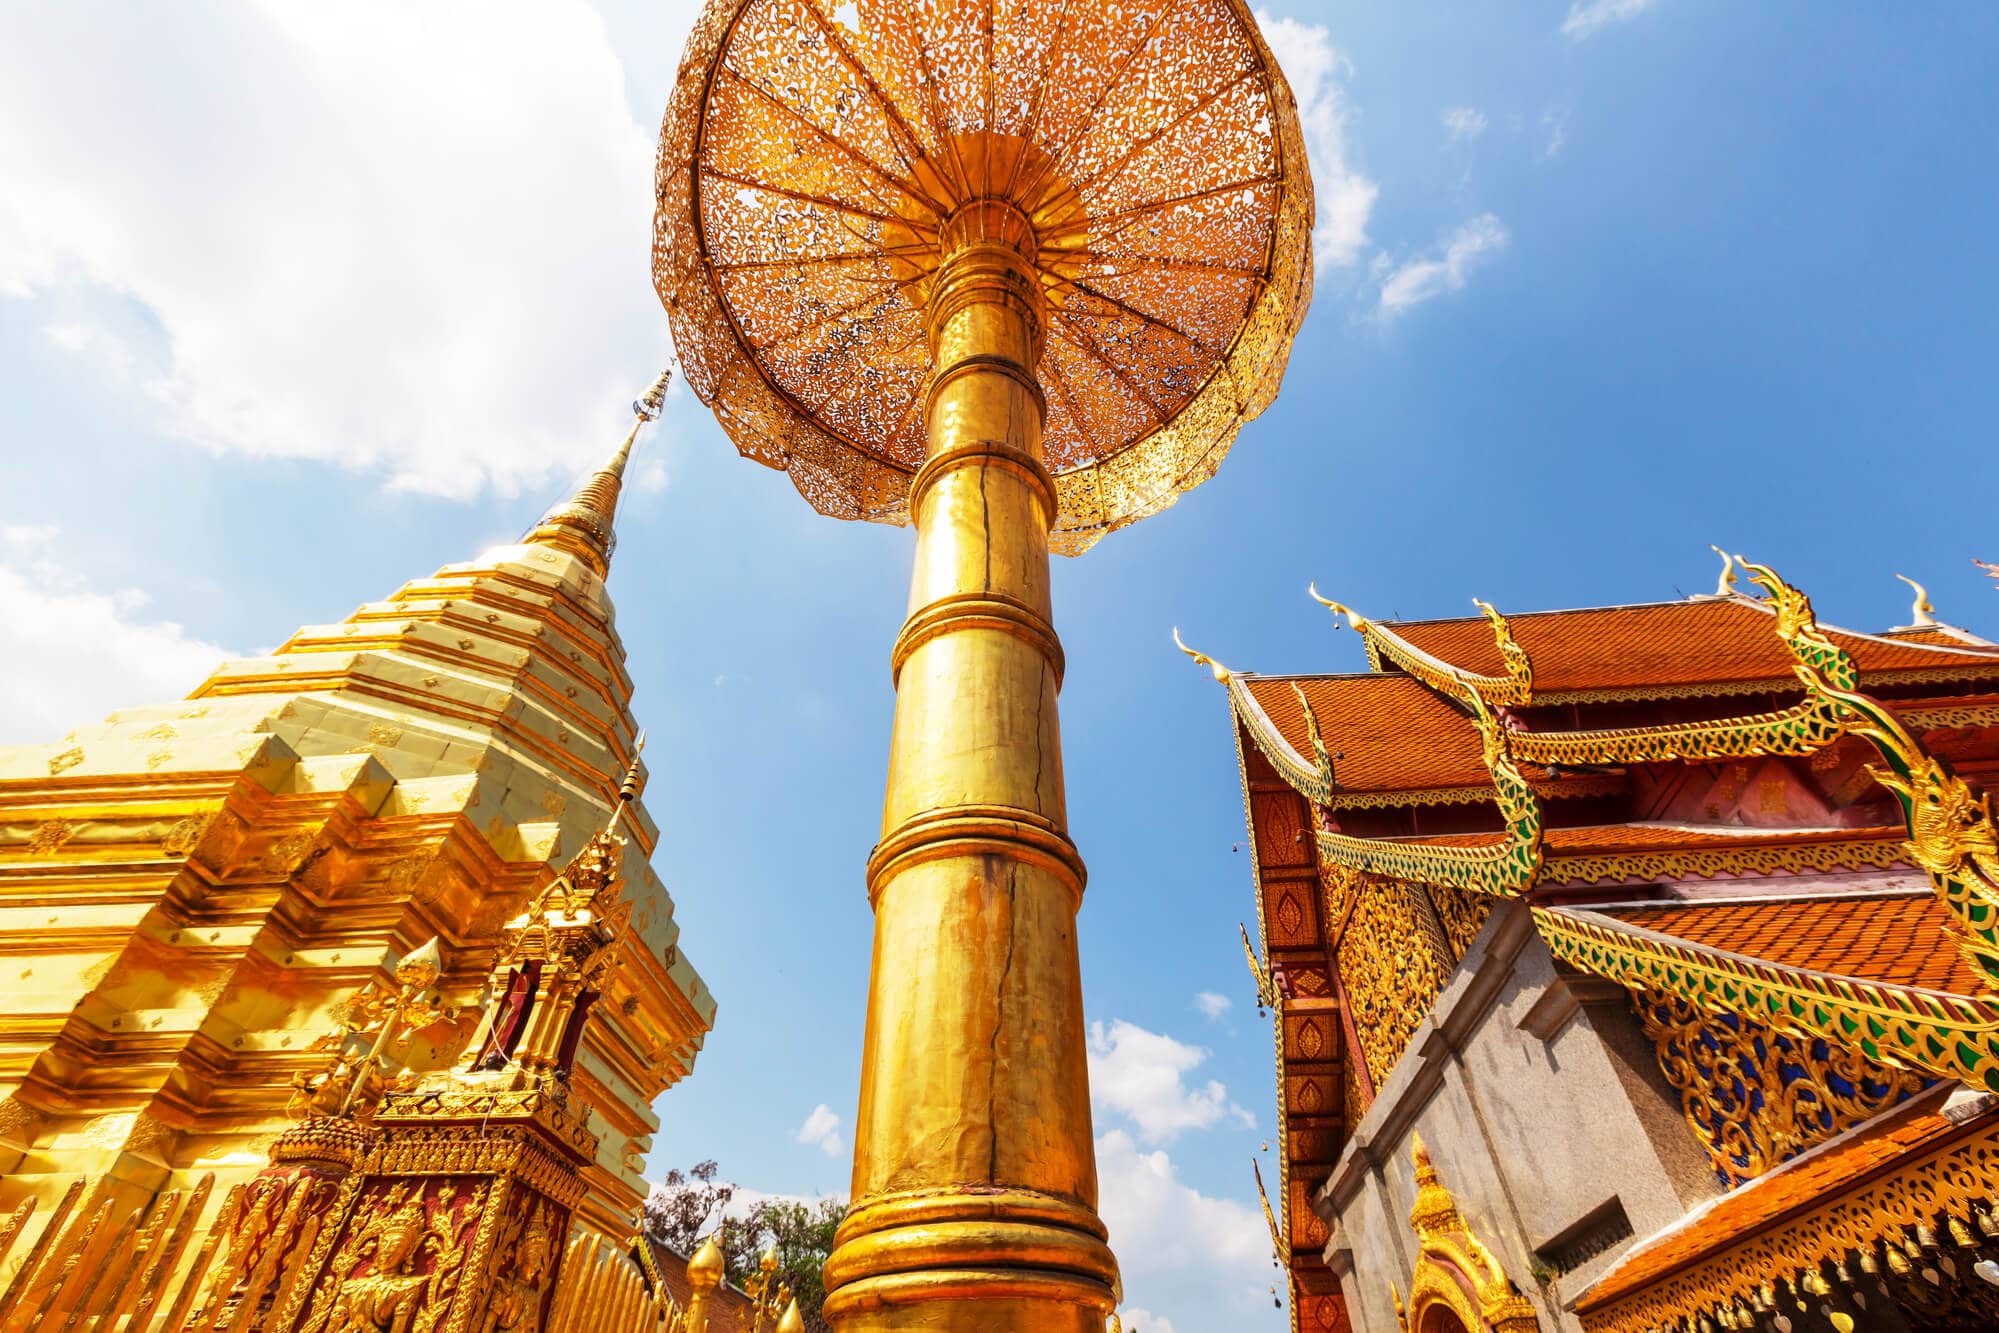 Gold chedi, temple and decoration seen from below on a sunny day at Wat Phra That Doi Suthep, one of the most impressive temples in Chiang Mai.